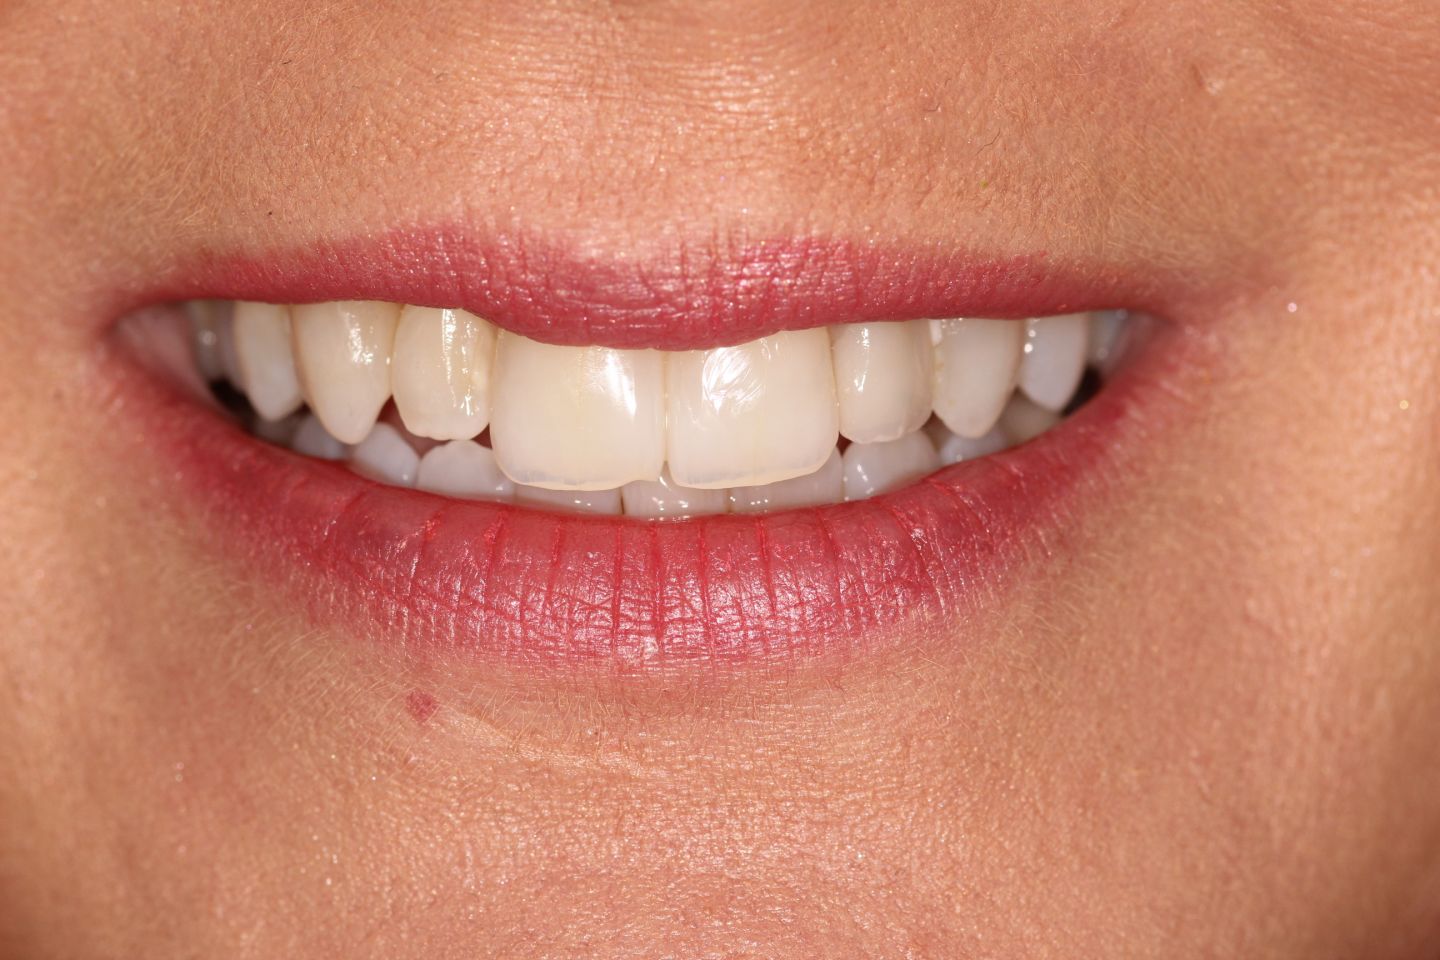 Fiona - Hygiene, Invisalign, white fillings, whitening and crowns